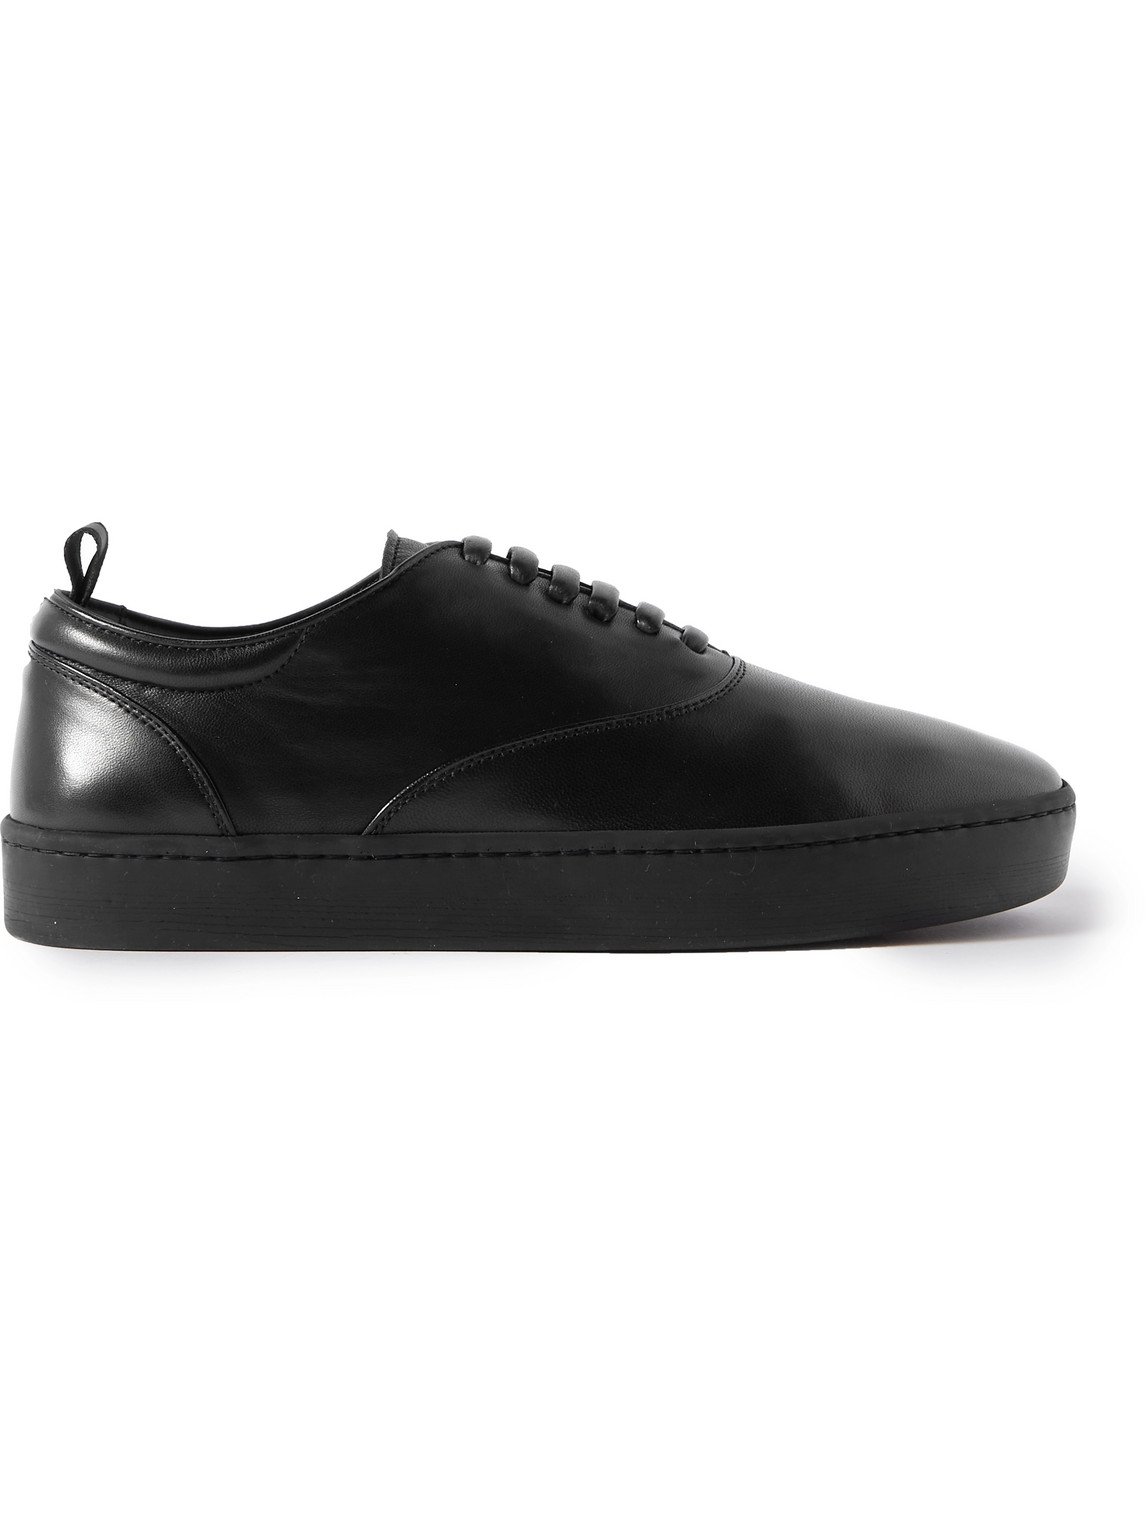 Officine Creative Bug Leather Sneakers